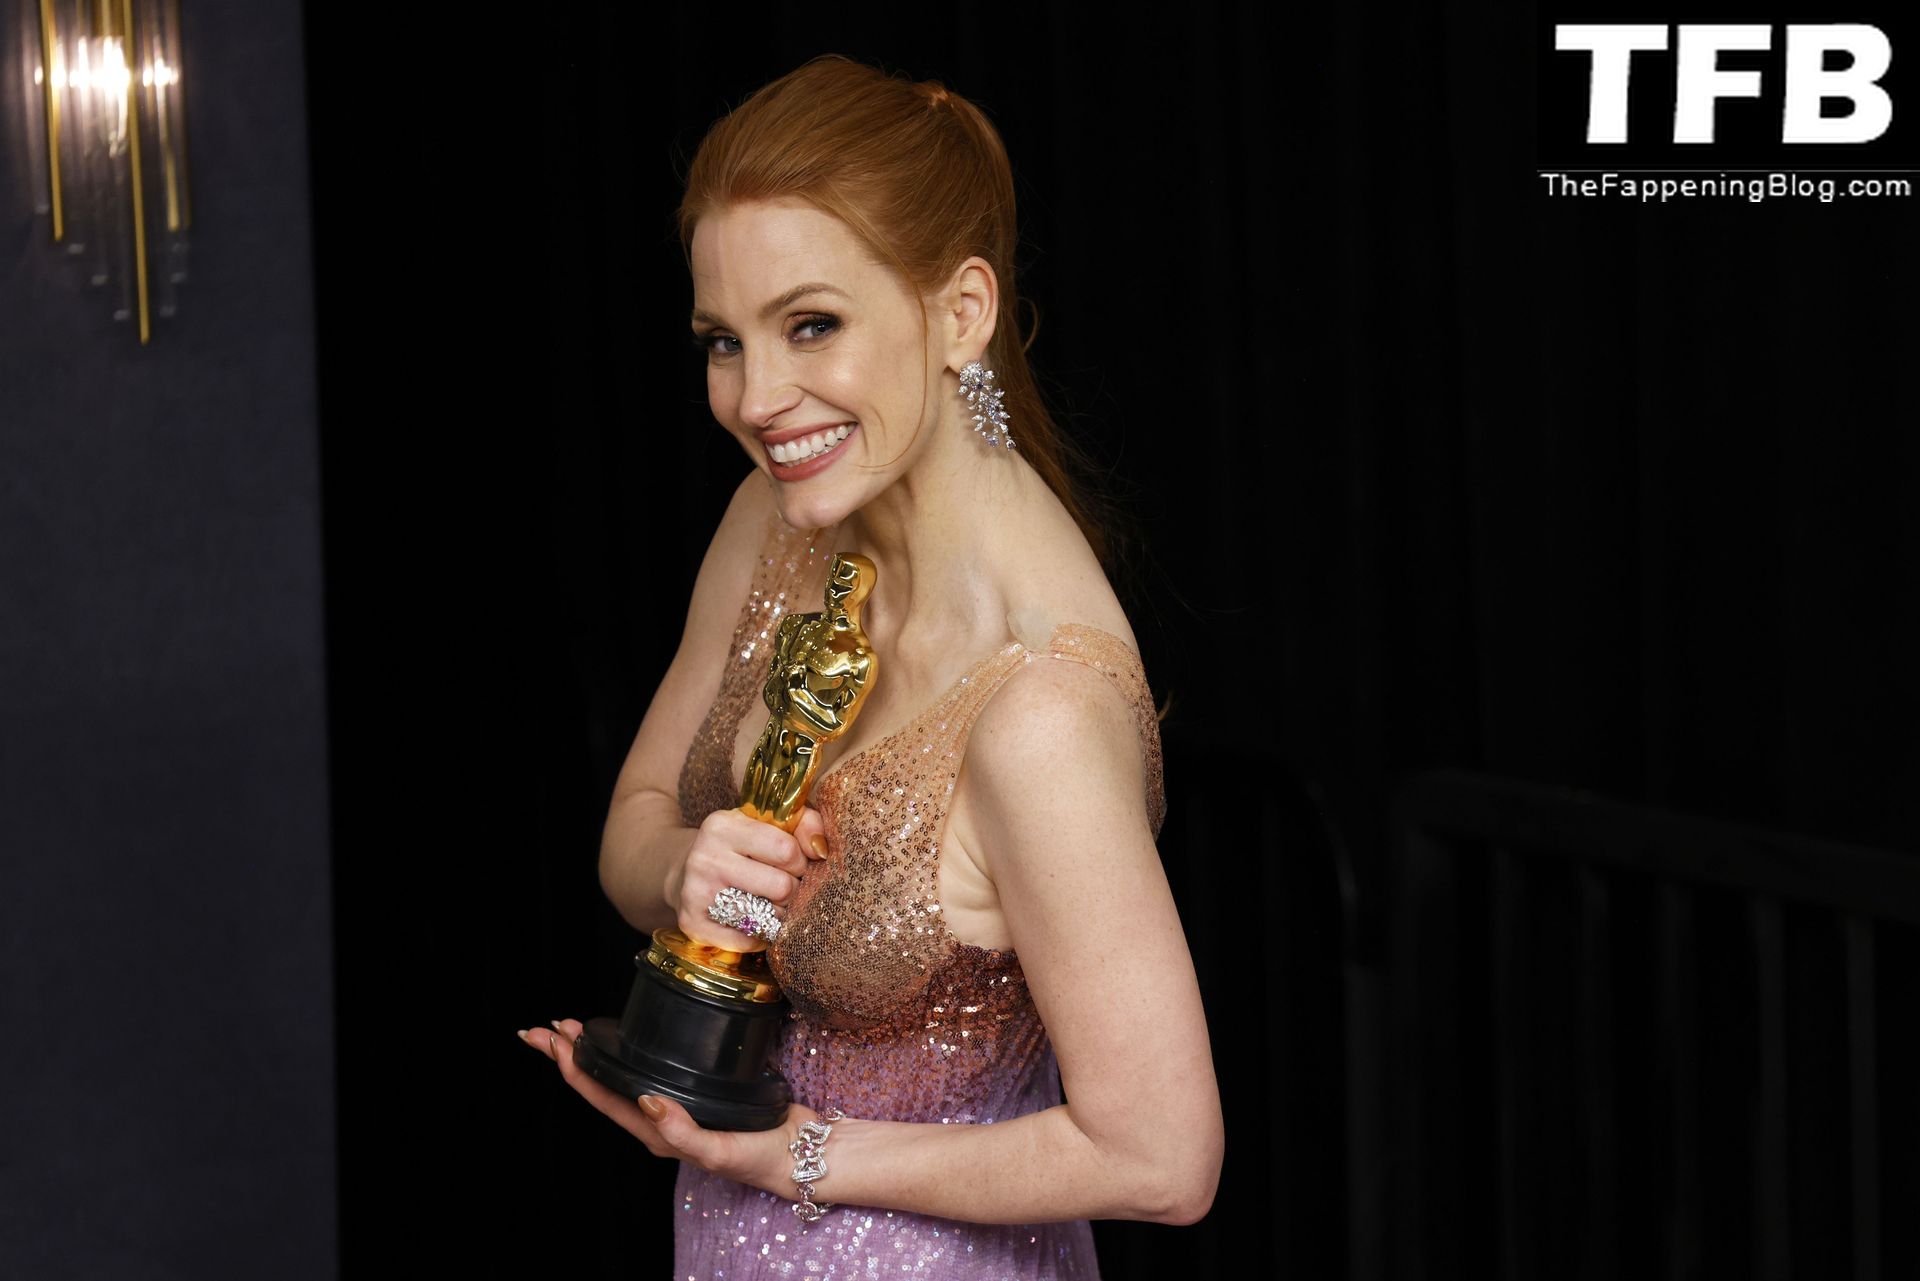 Jessica-Chastain-Sexy-The-Fappening-Blog-58-1.jpg